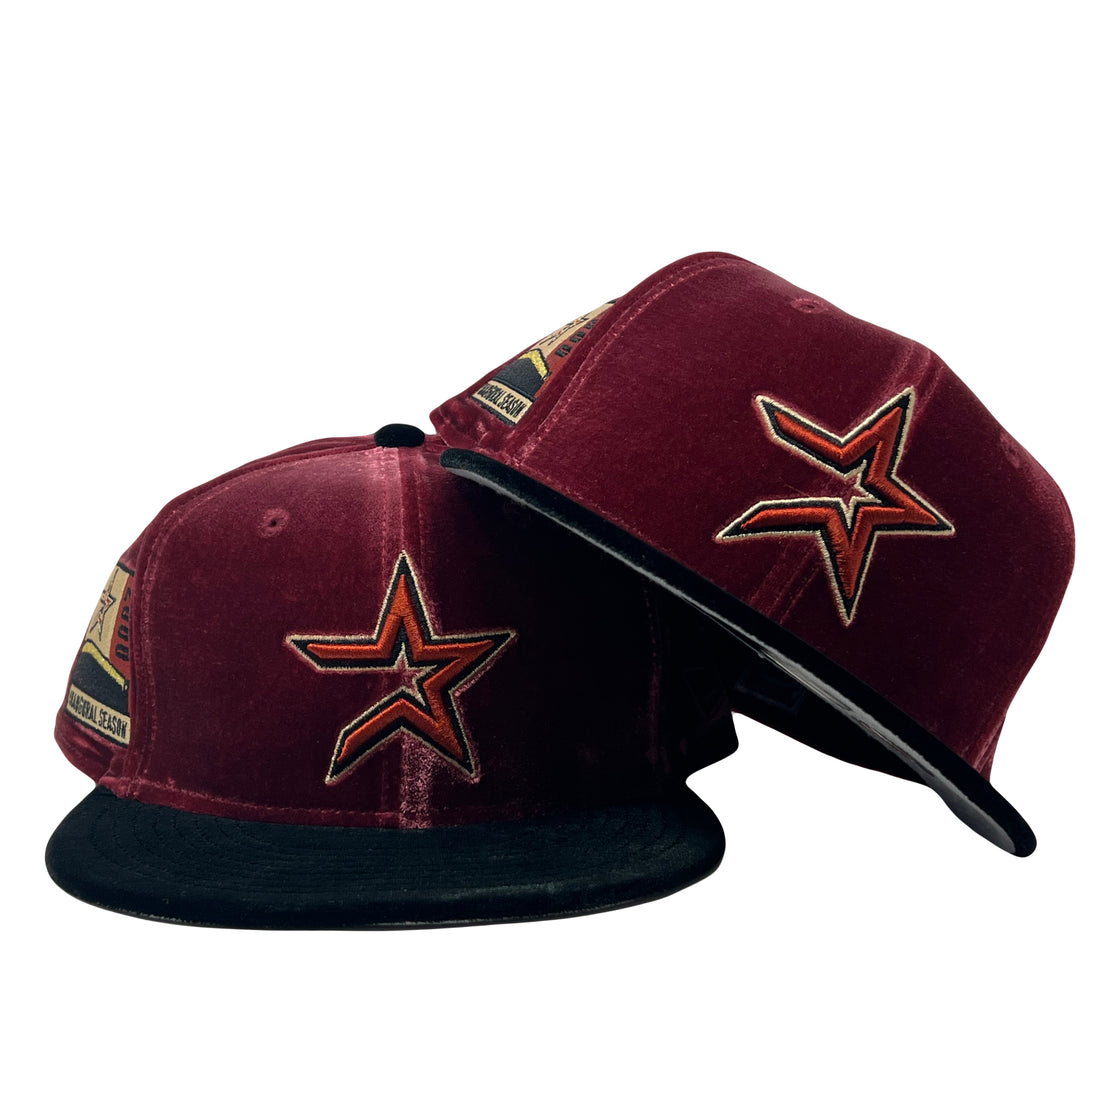 Houston Astros 2000 Inaugural Season Velvel Collection New Era Fitted Hat